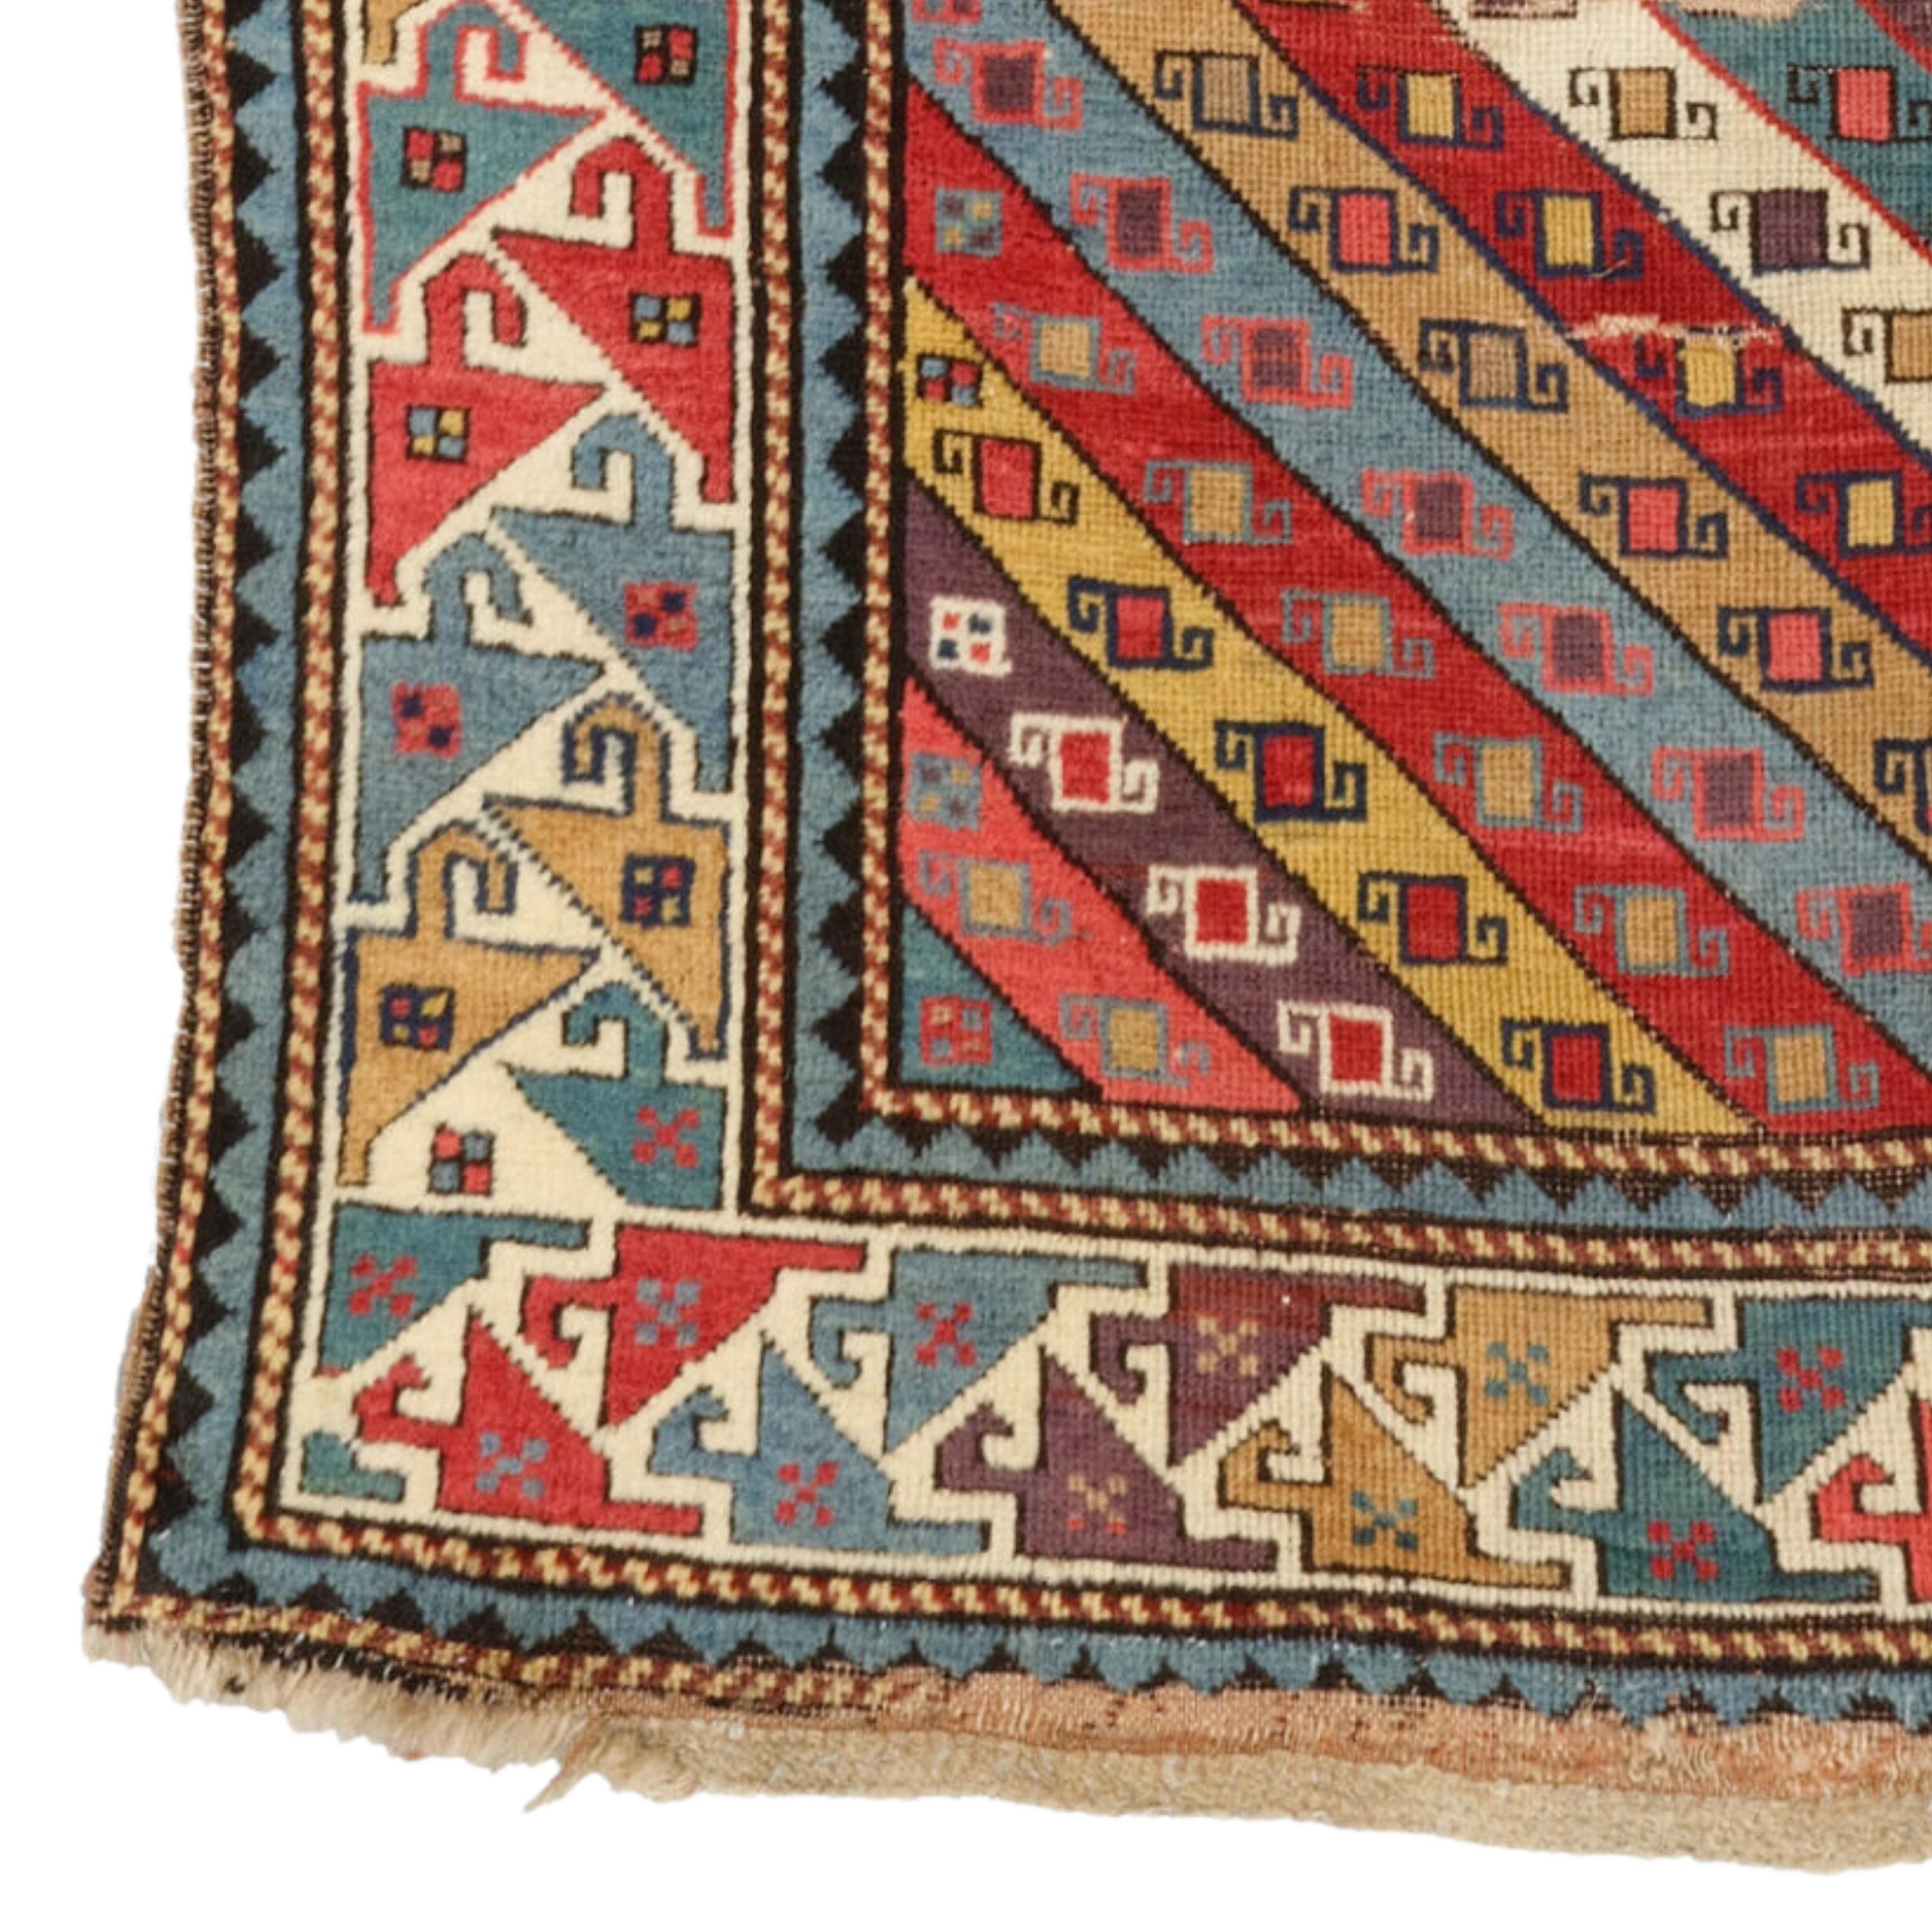 Middle Of the 19th Century Caucasian Gendje Rug
There is a small hole under the center of the top border.
Size: 107 x 196 cm (3,51 - 6,43 ft)

Add Color and History to Your Home: 19th Century Caucasian Gendje Rug

Would you like to add both color